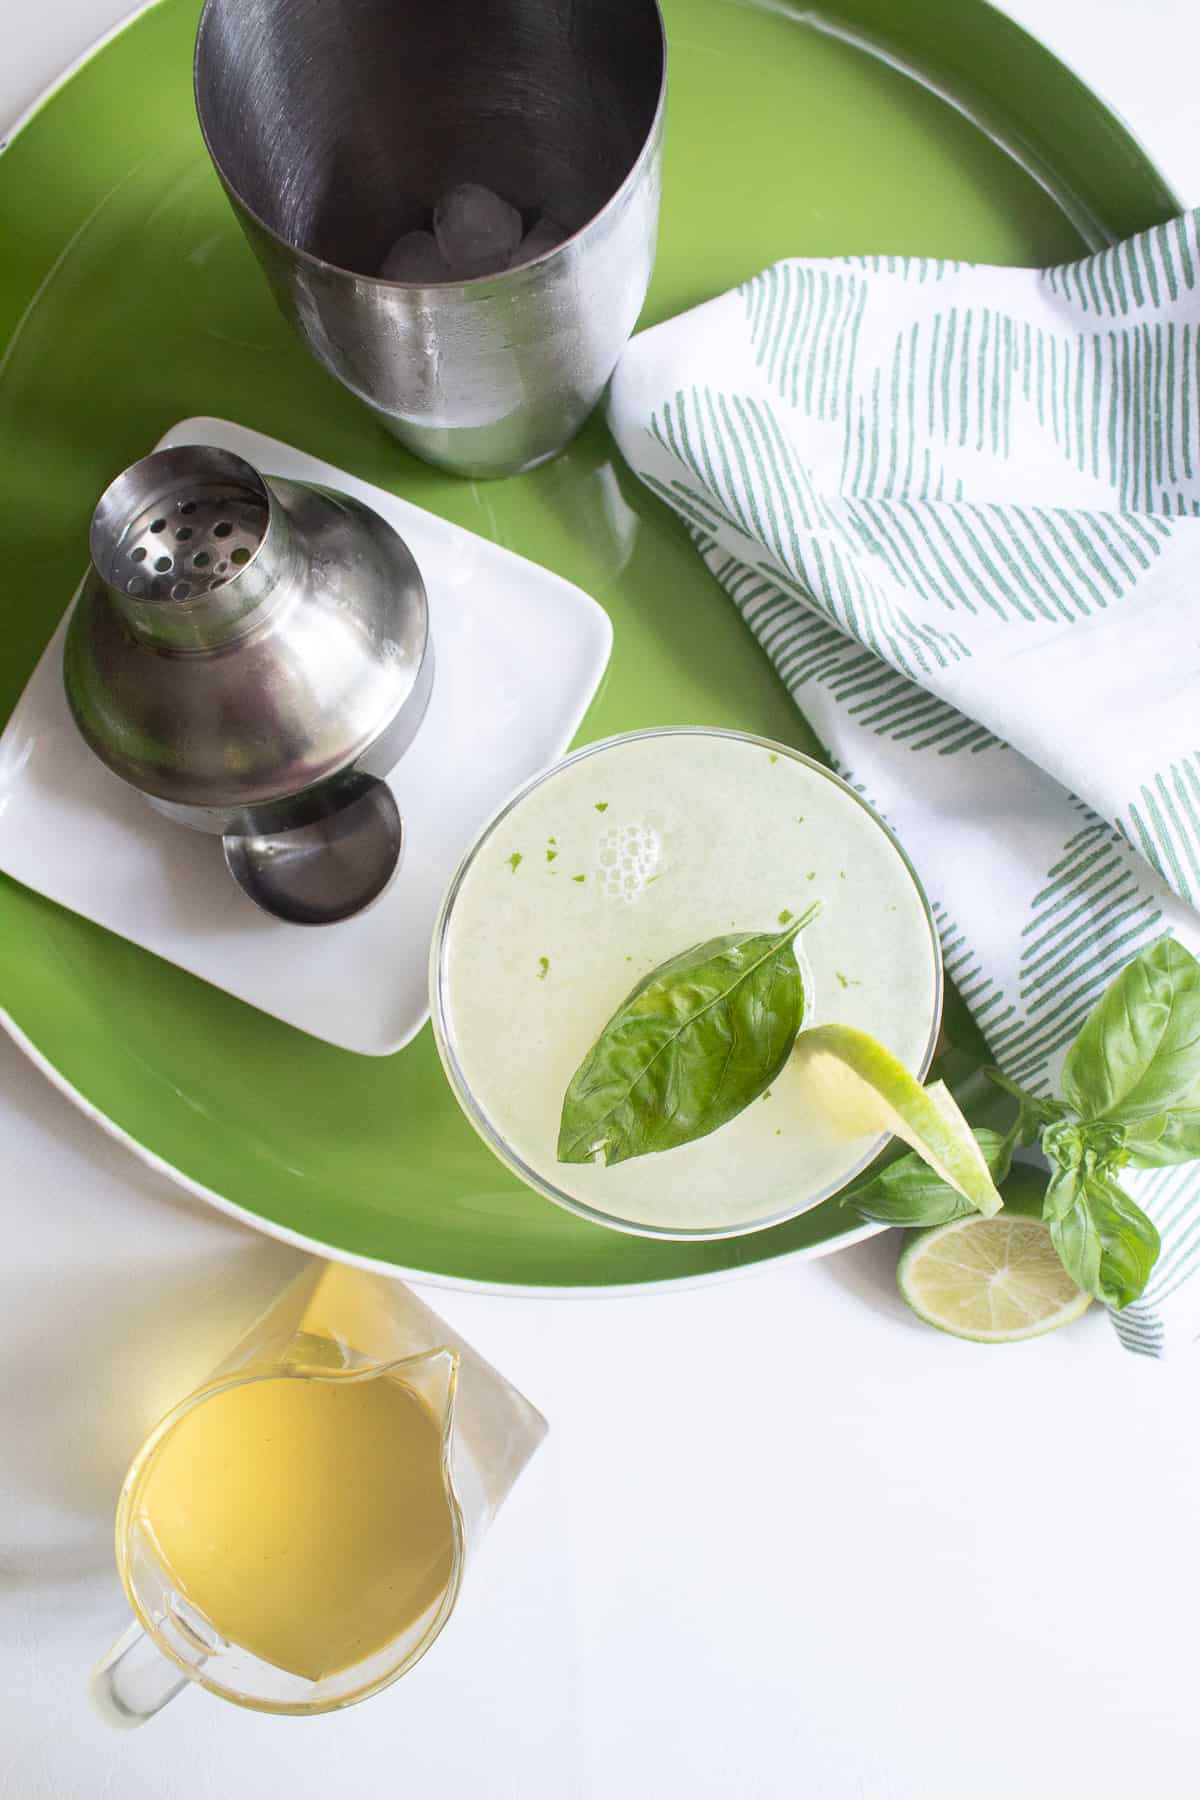 A pale green cocktail in a coupe glass sits on a green tray near a cocktail shaker, basil leaves, lime slices, and a pitcher of a pale yellow syrup.